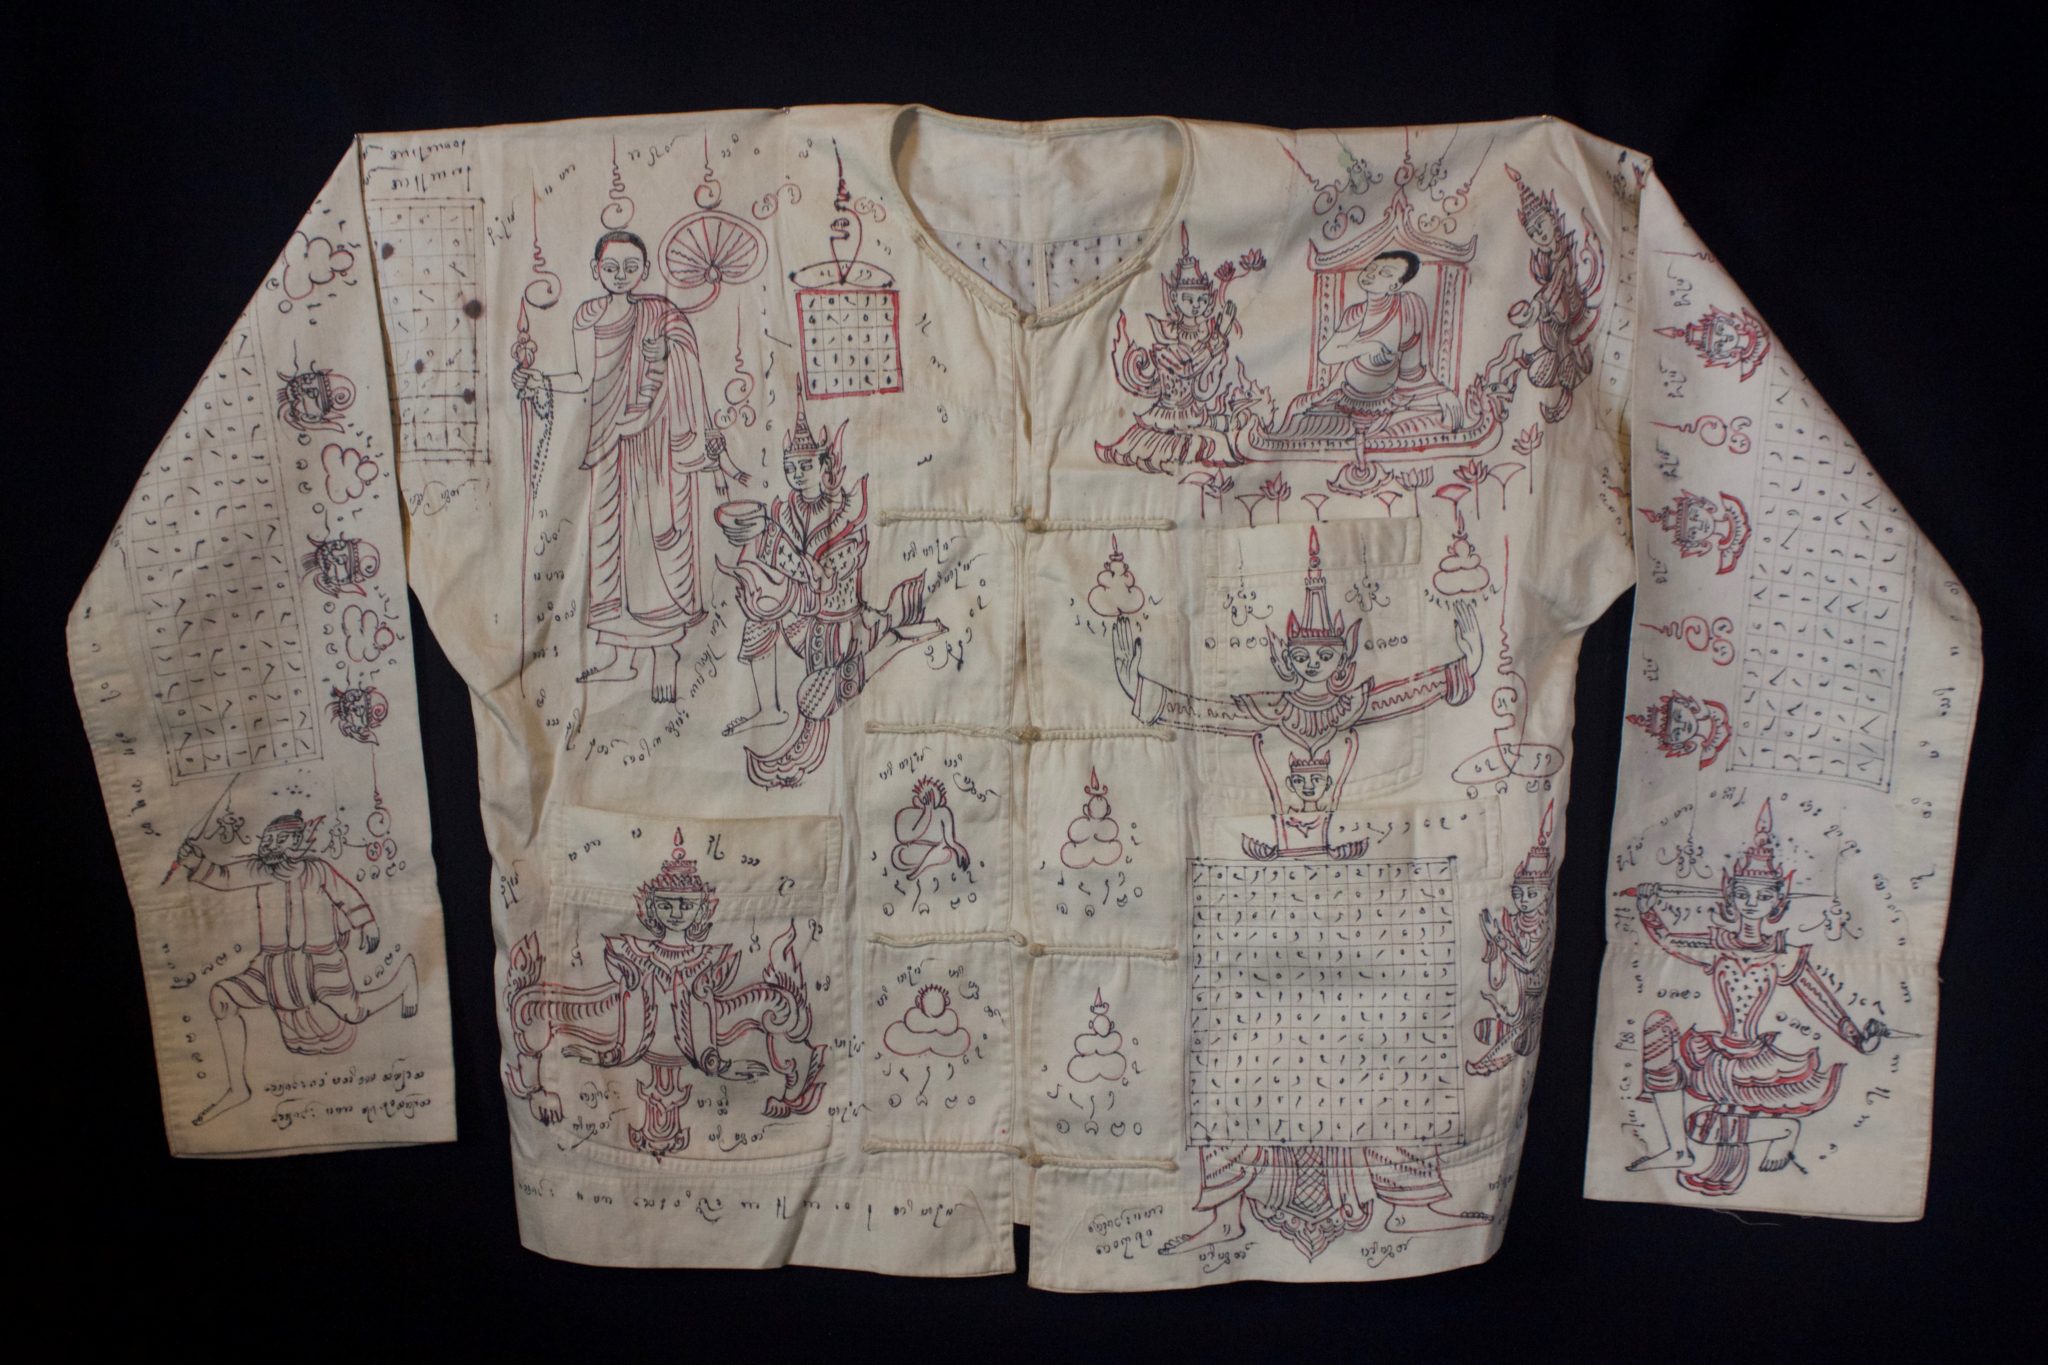 Amulet Yantra Shirt - extremely rare and powerful protective garment Thailand Vietnamese tribal shaman Mid 20th c. Cotton, ink, pigment Handmade and drawn by the shaman, it depicts prayers, signs, numbers and a deities. The sacred cloth is an undergarment worn as a talisman with great protective power against physical harm, like bullets, spears, knives, wild animals and evil spirits. This one may have been commissioned by a wealthy man who felt he needed protection. Soldiers would also wear these if they could afford one. 21” x 61” $2900